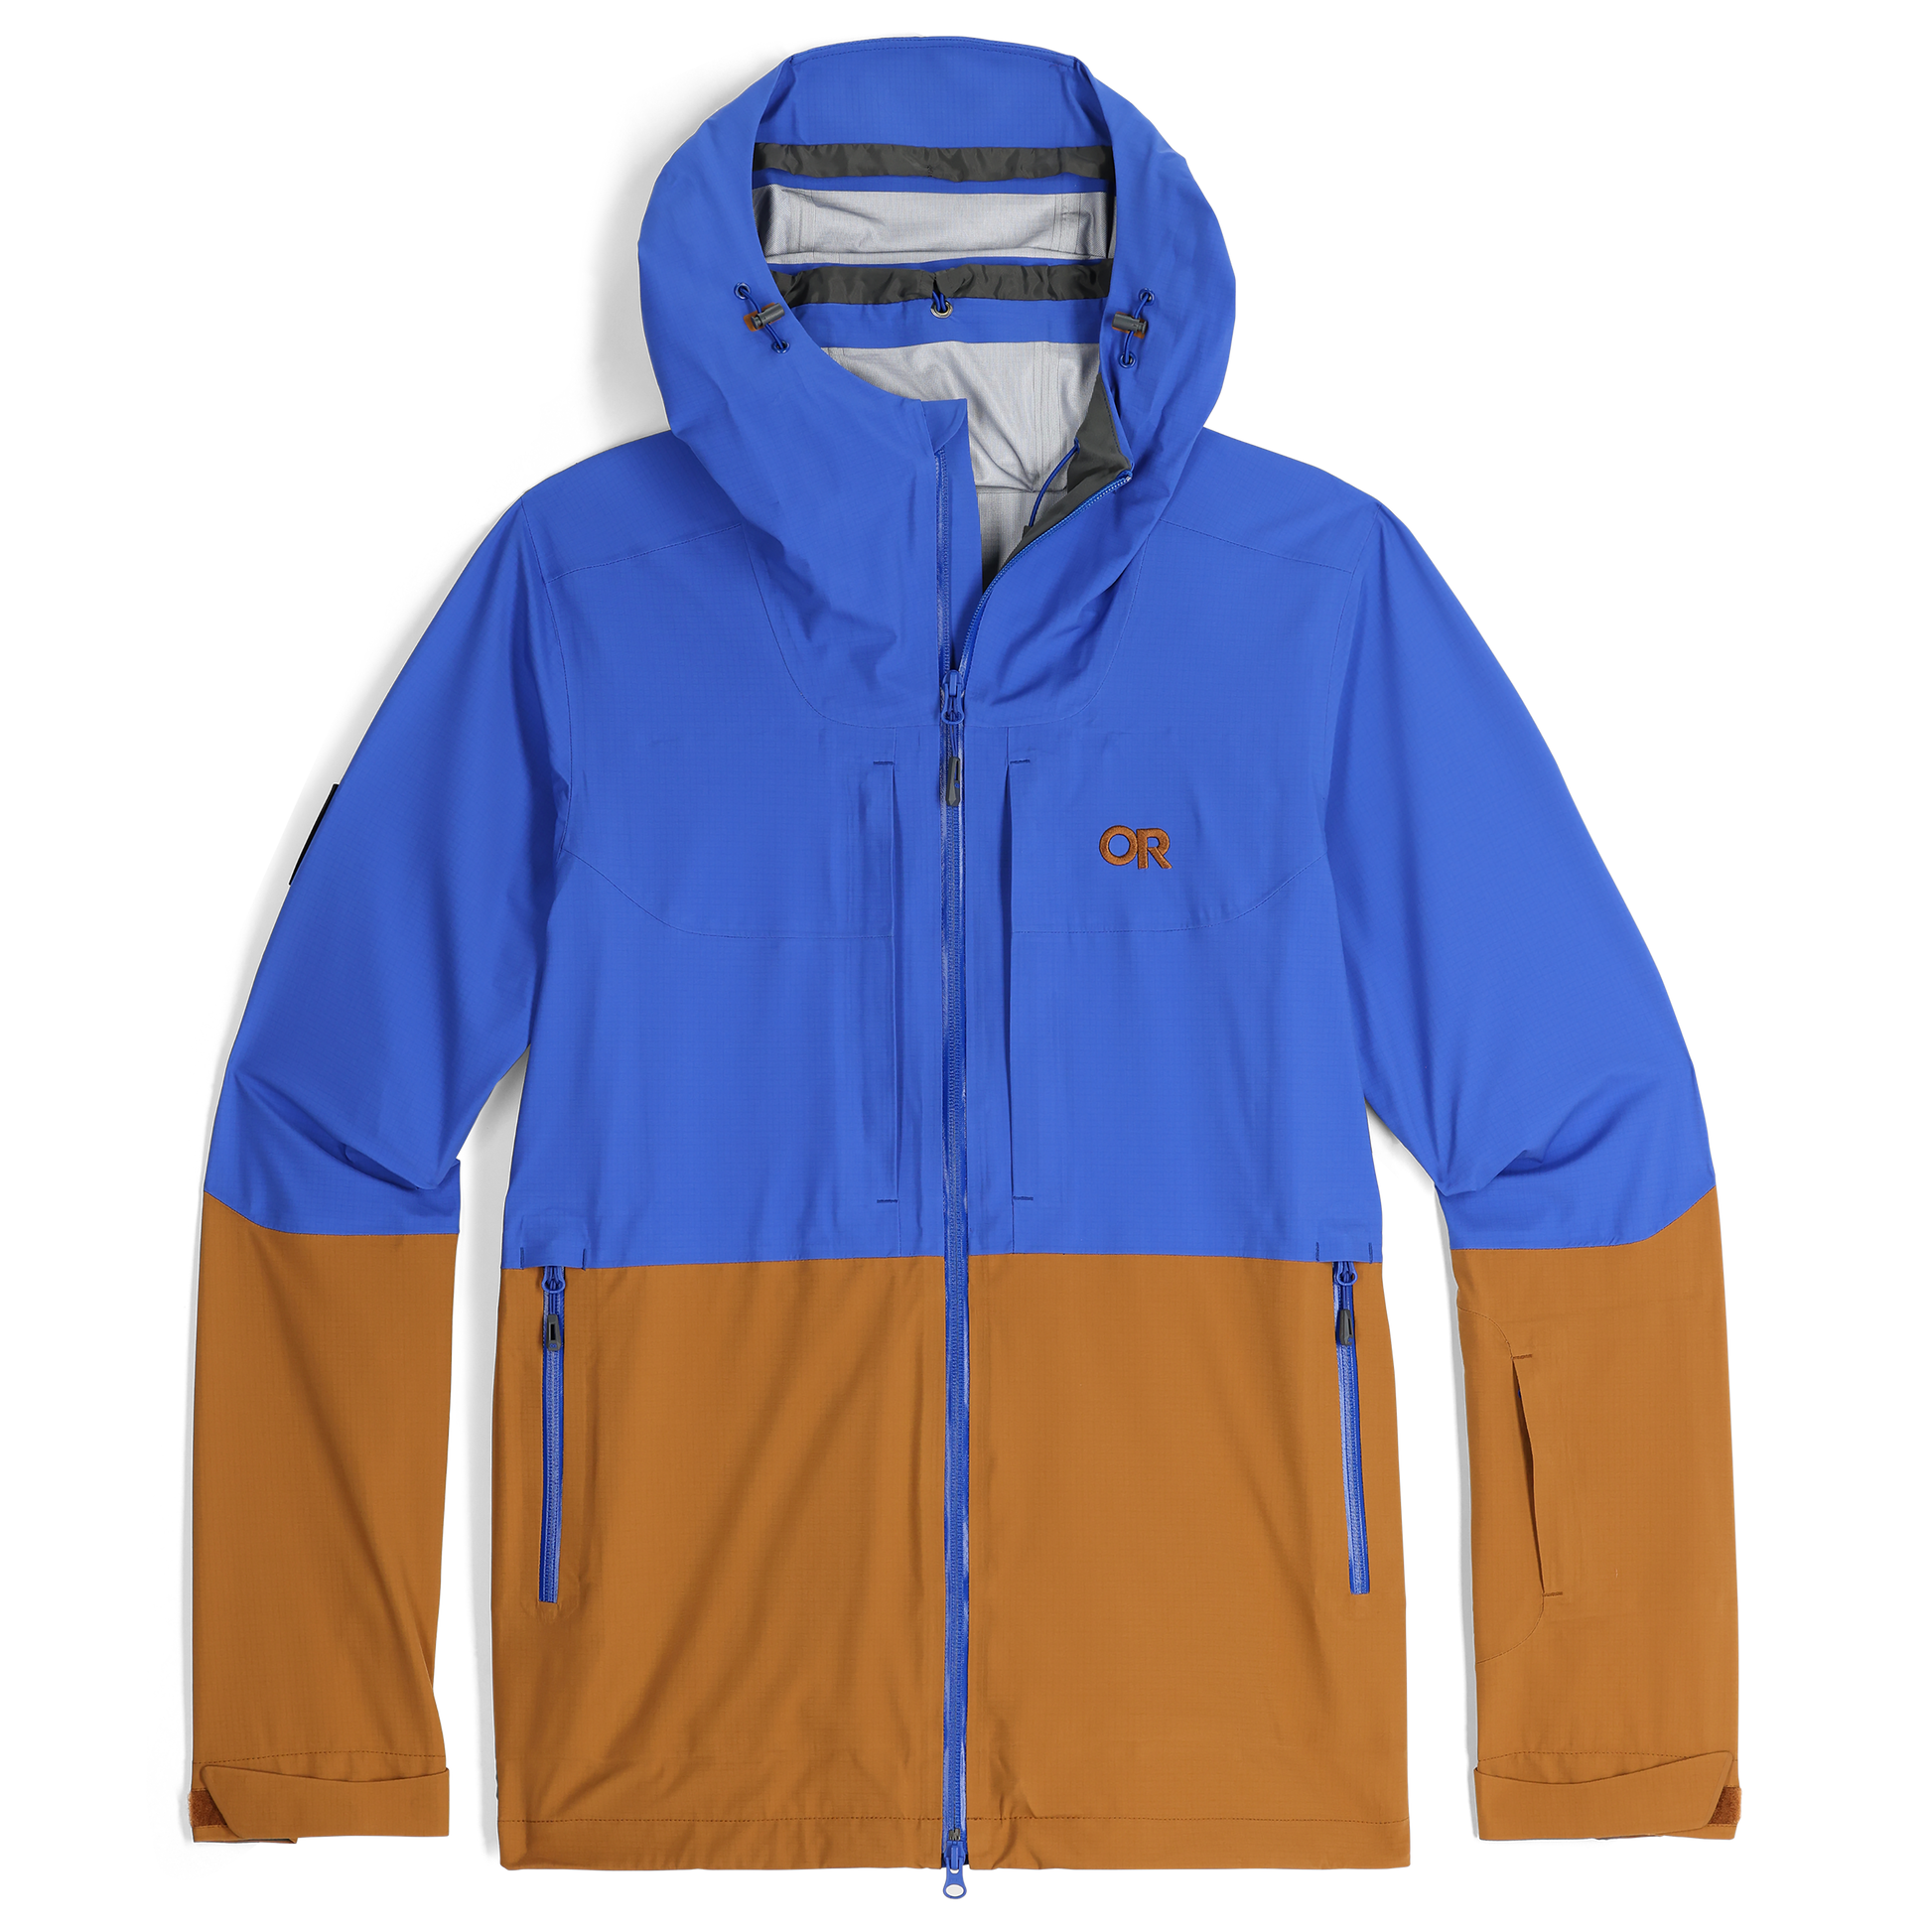 Outdoor Research Carbide Jacket - The Best Backcountry Jacket for Under  $300 - Engearment